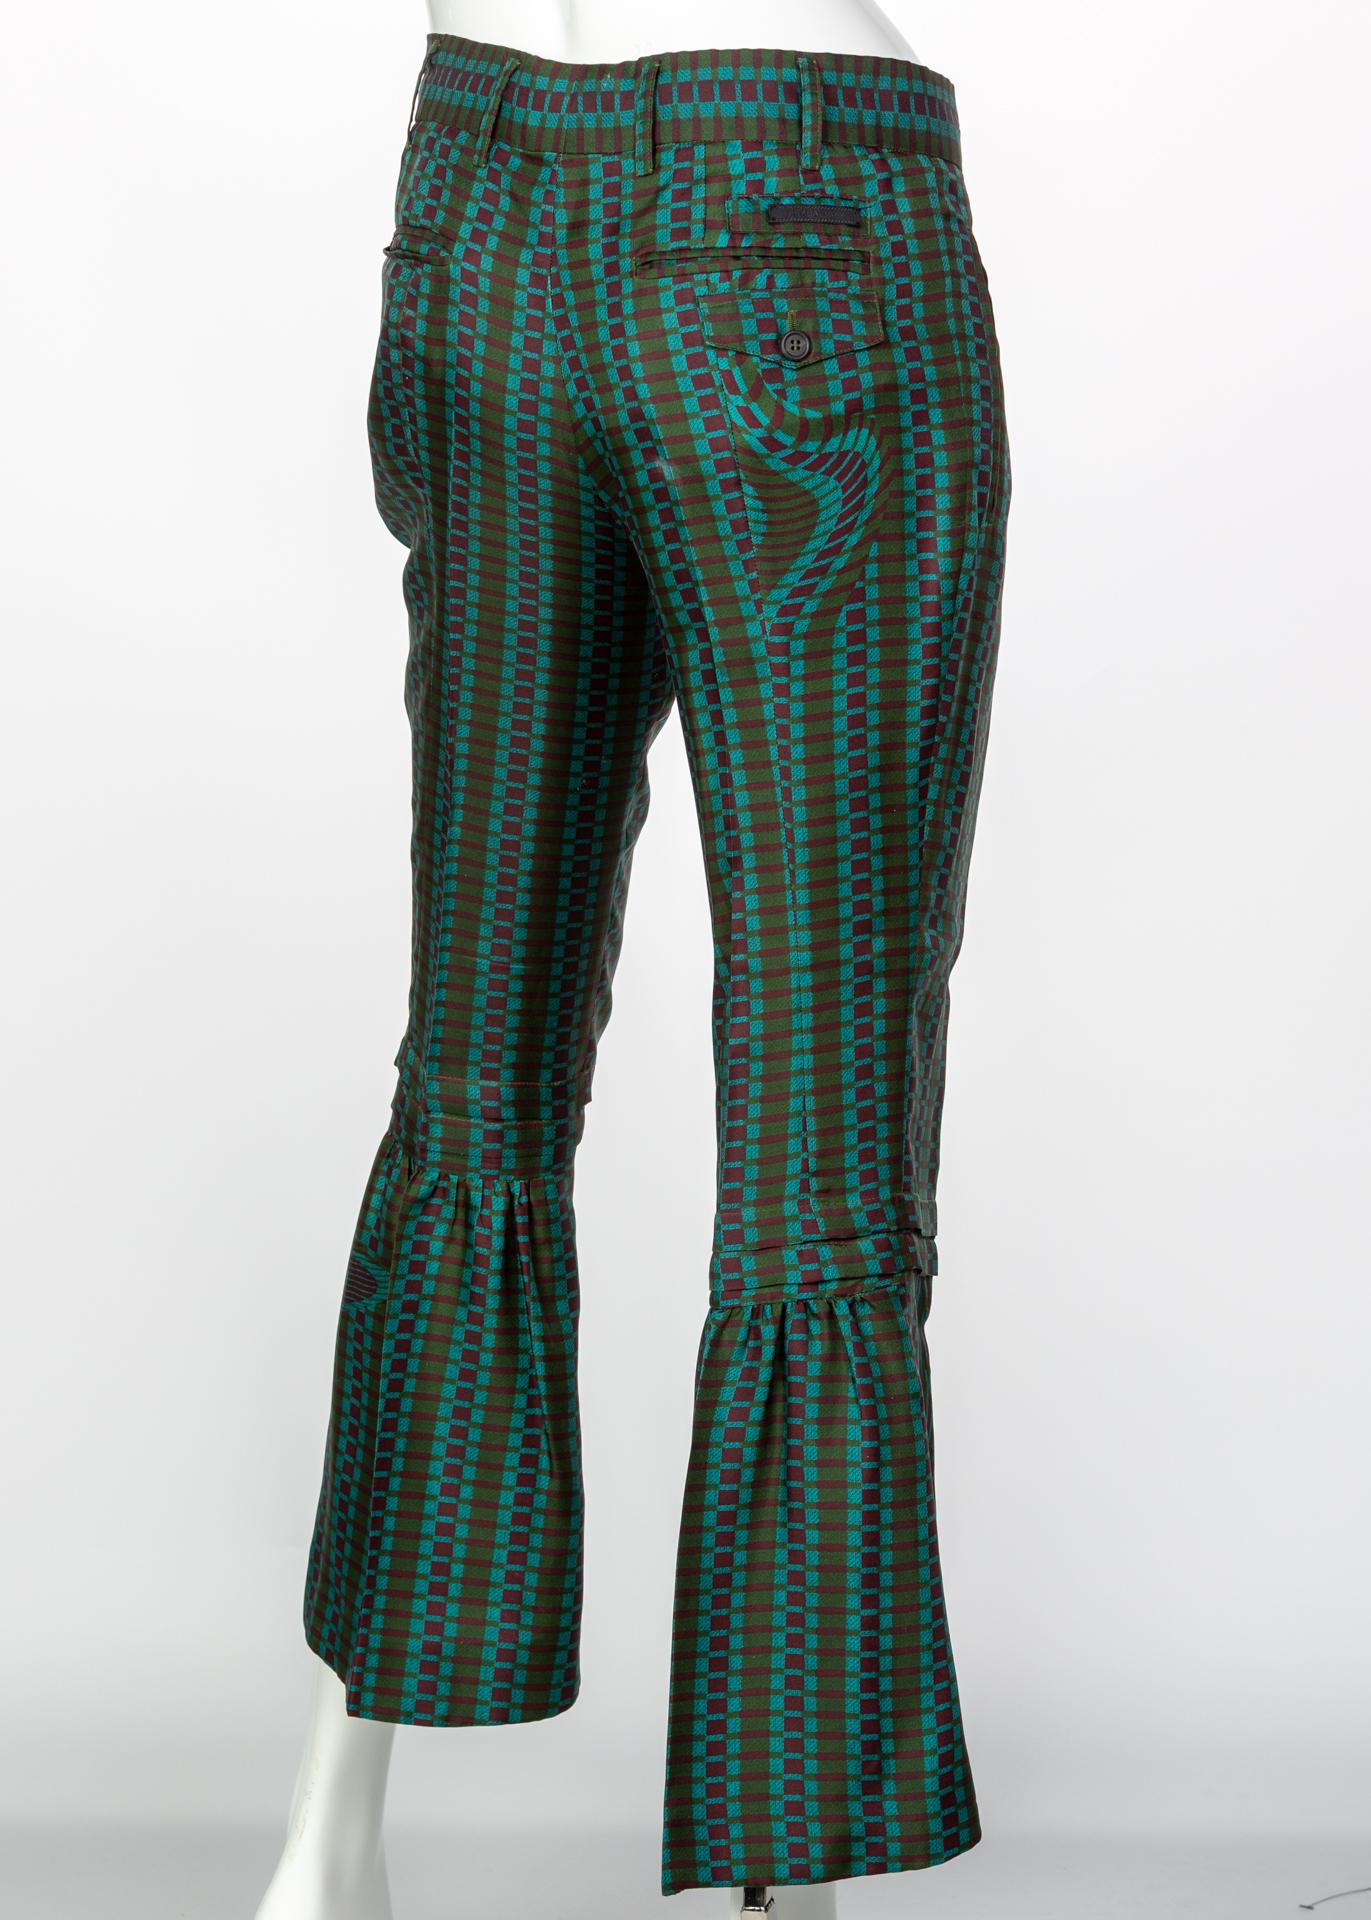 Prada Fairy Collection Green Purple Printed Flared Runway Pants, 2008 In Excellent Condition In Boca Raton, FL